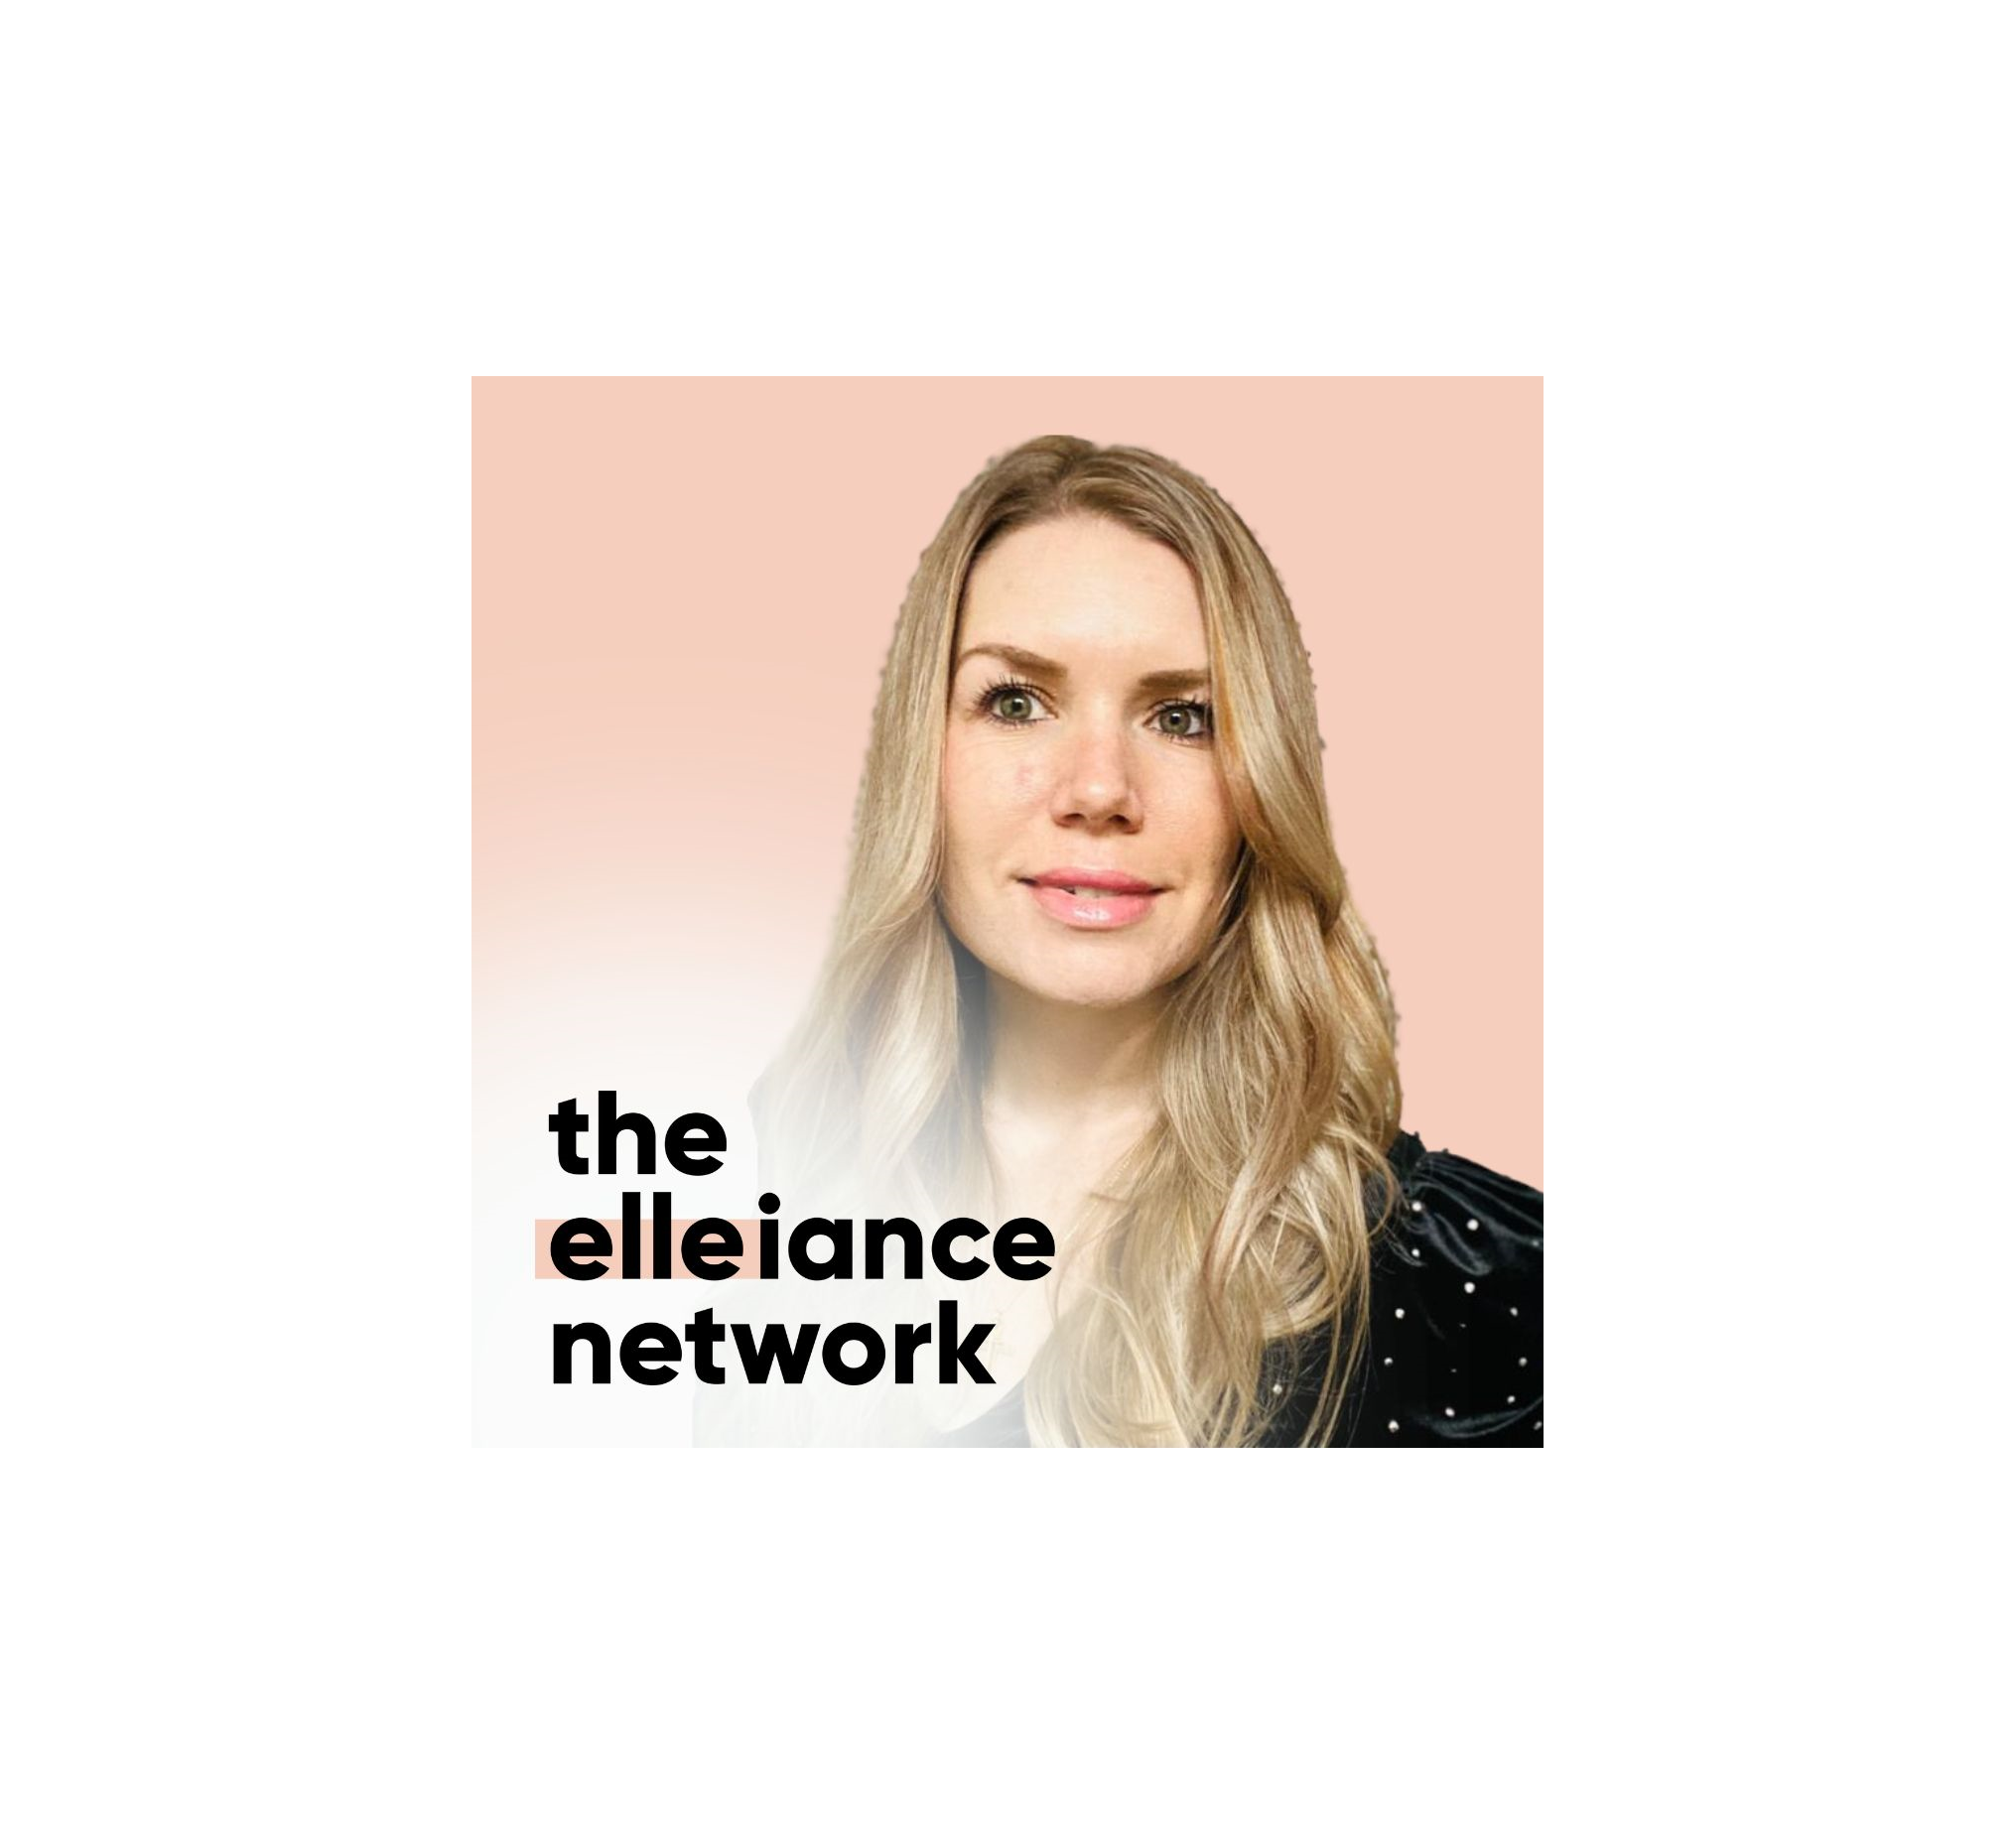 Transforming Dreams Into a Reality - The Elleiance Network